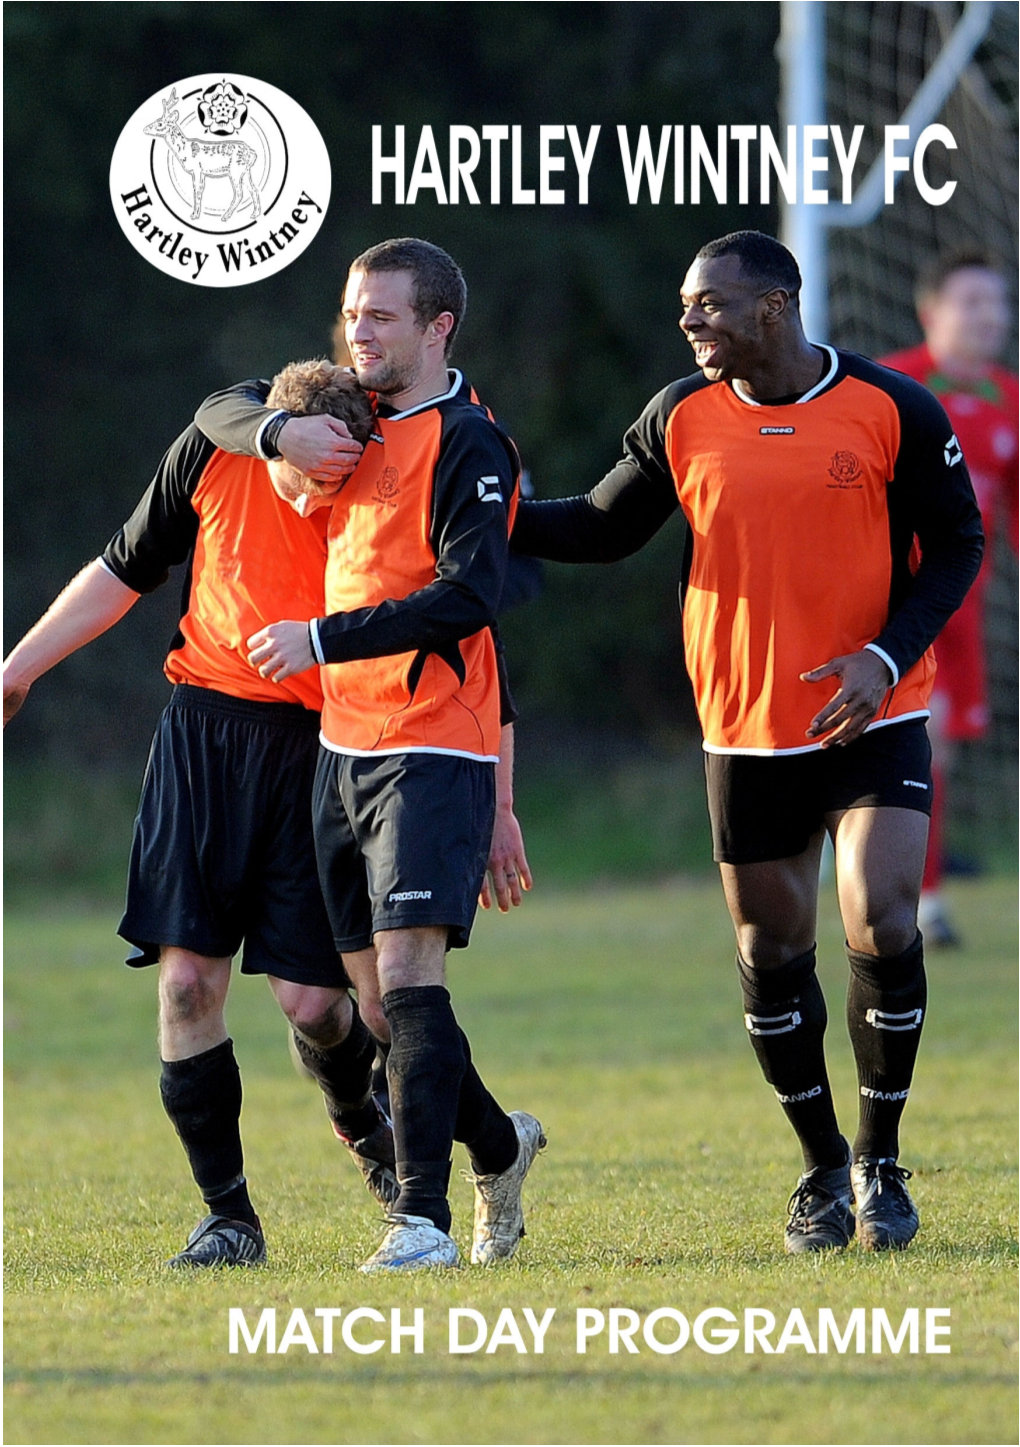 Feltham Cherry Red Records Saw Us Win 3-1 in a Game That Will Be Re- Combined Counties League Div 1 Membered for Michael Lee's Dismissal